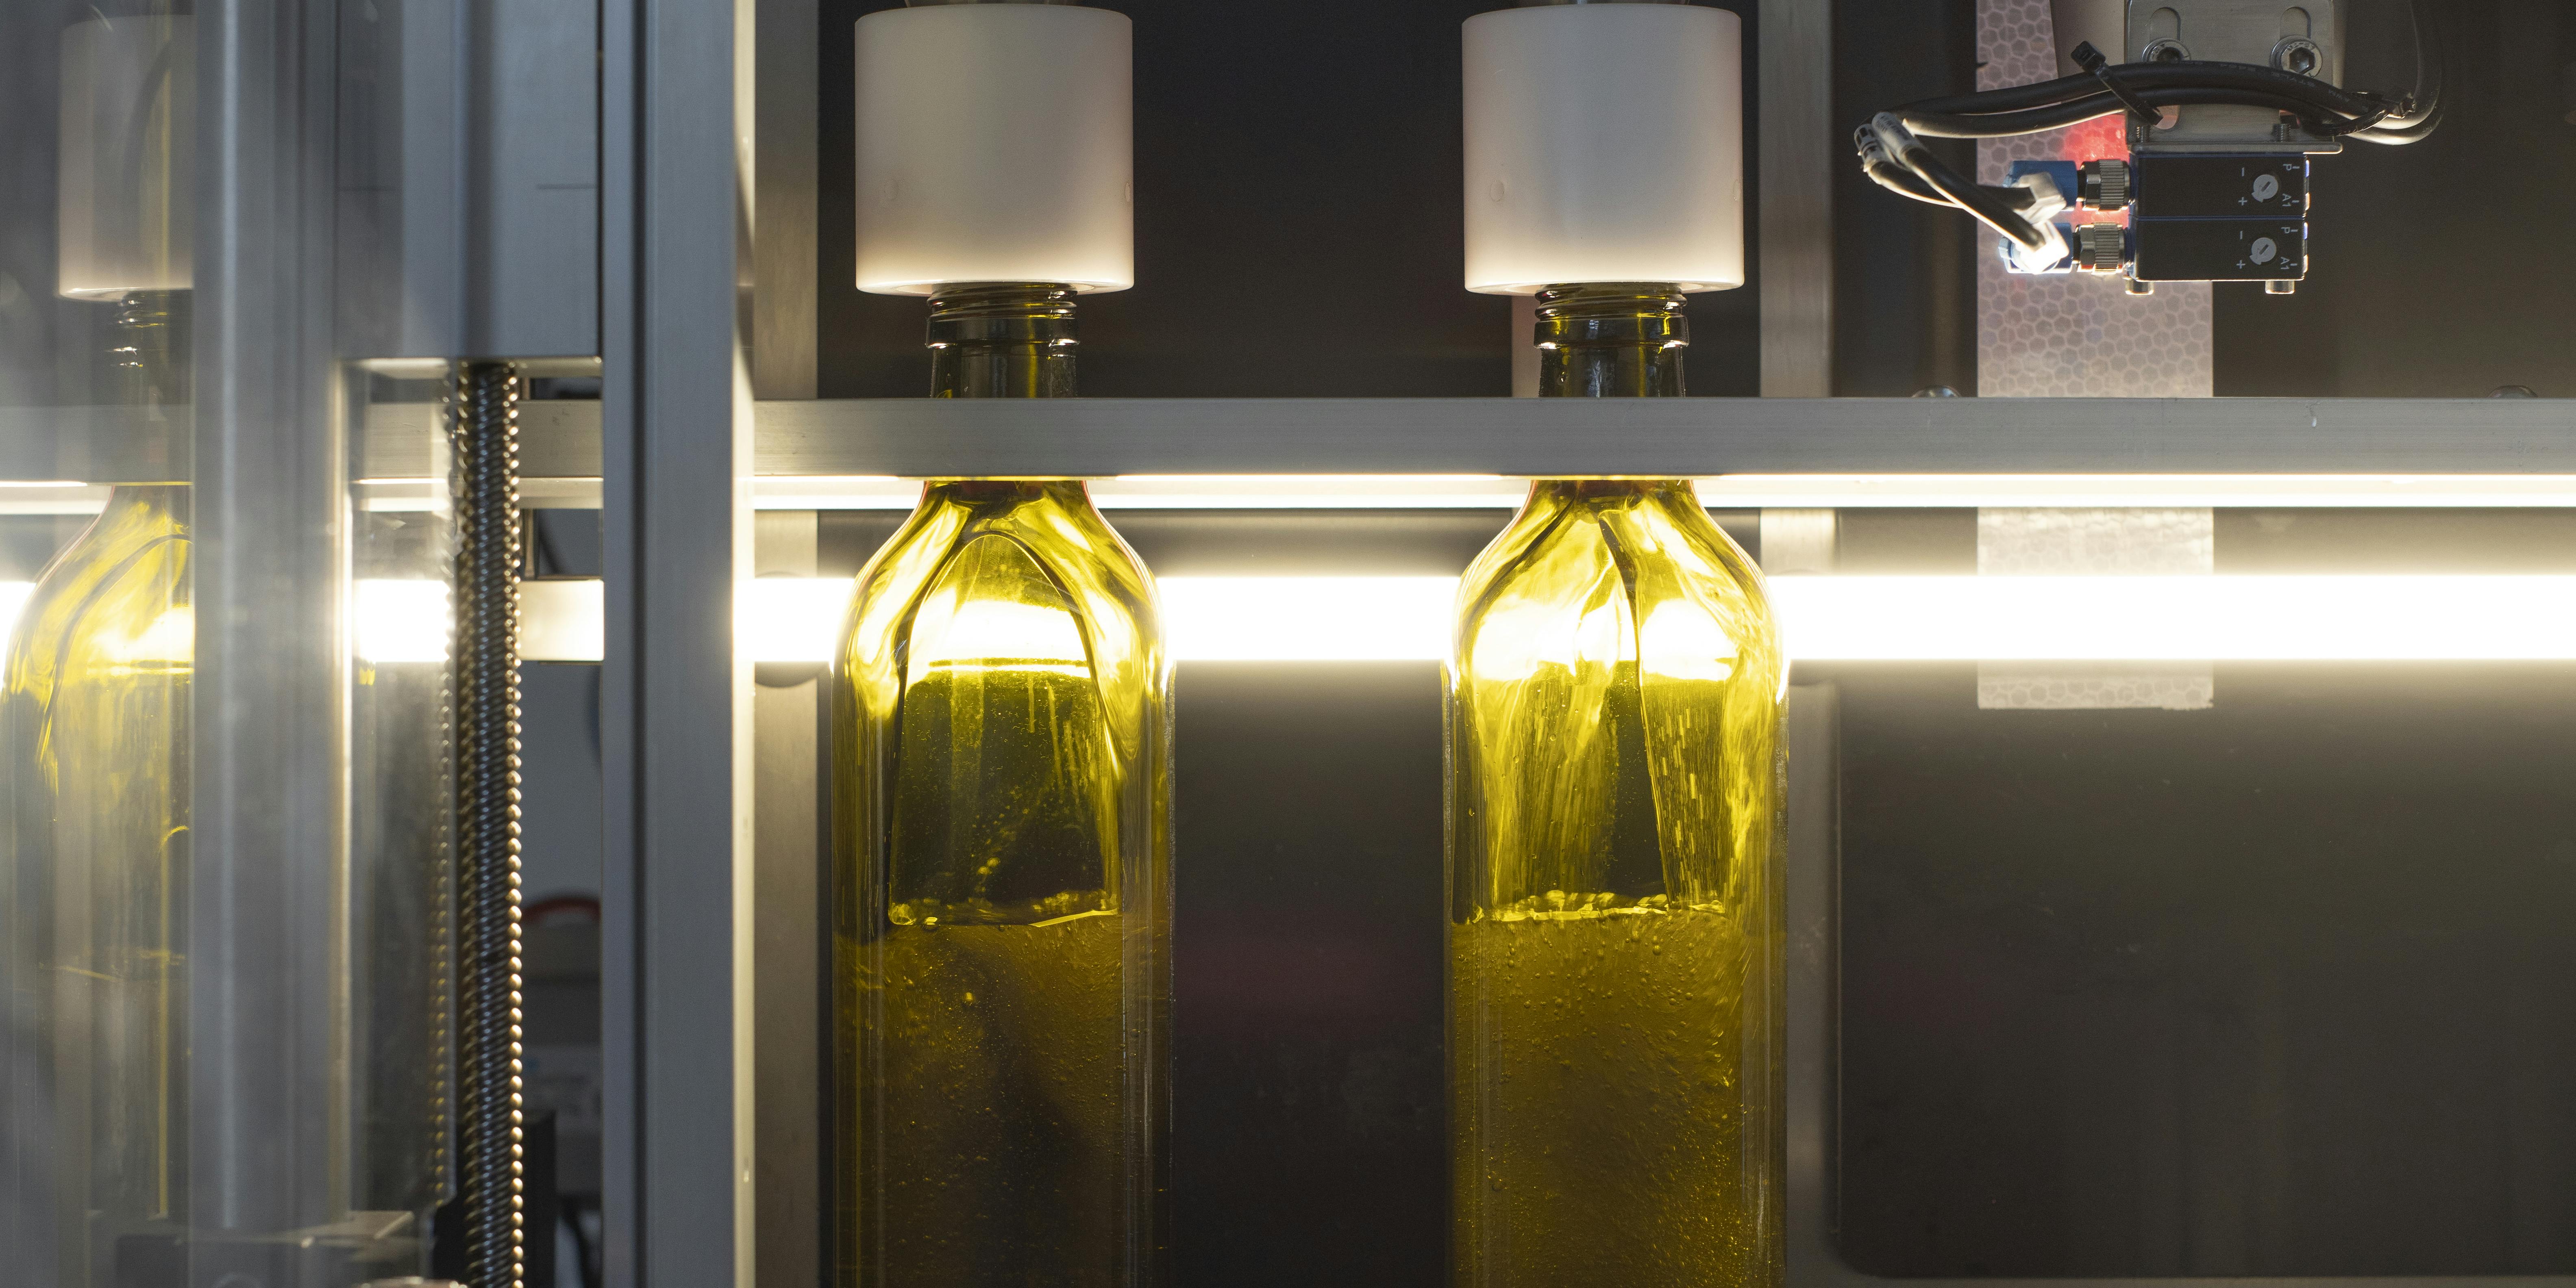 In this photo it is possible to see two square green bottles of oil, standing in the filling station. The oil enters the bottle by sliding on its walls.